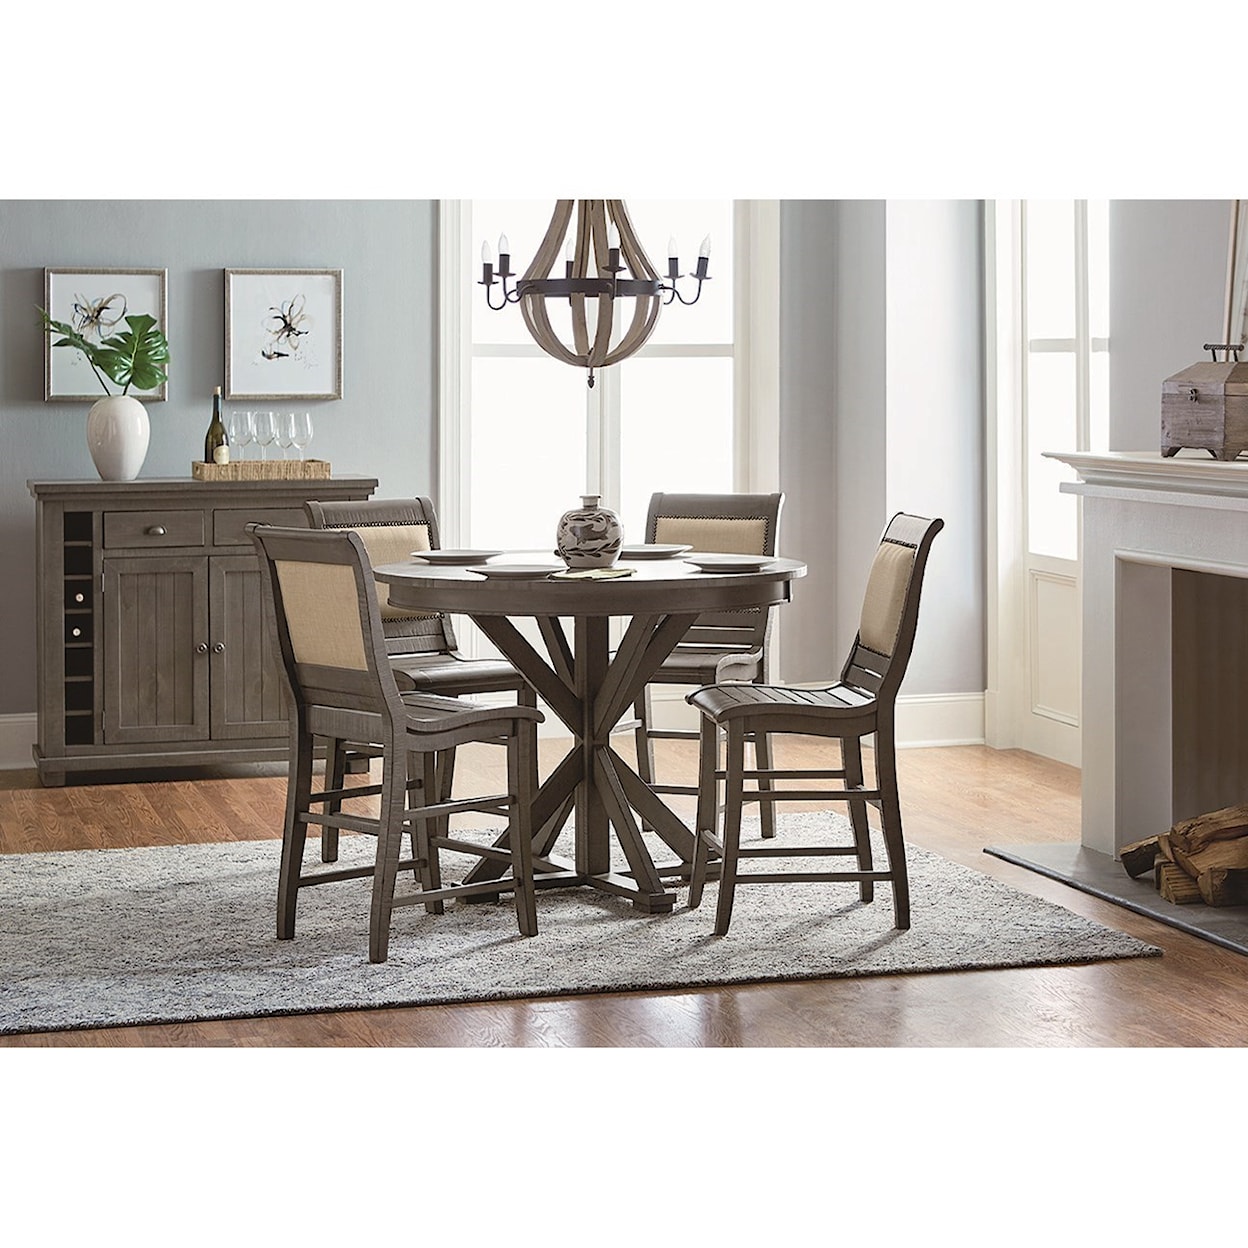 Progressive Furniture Willow Dining Round Counter Height Table